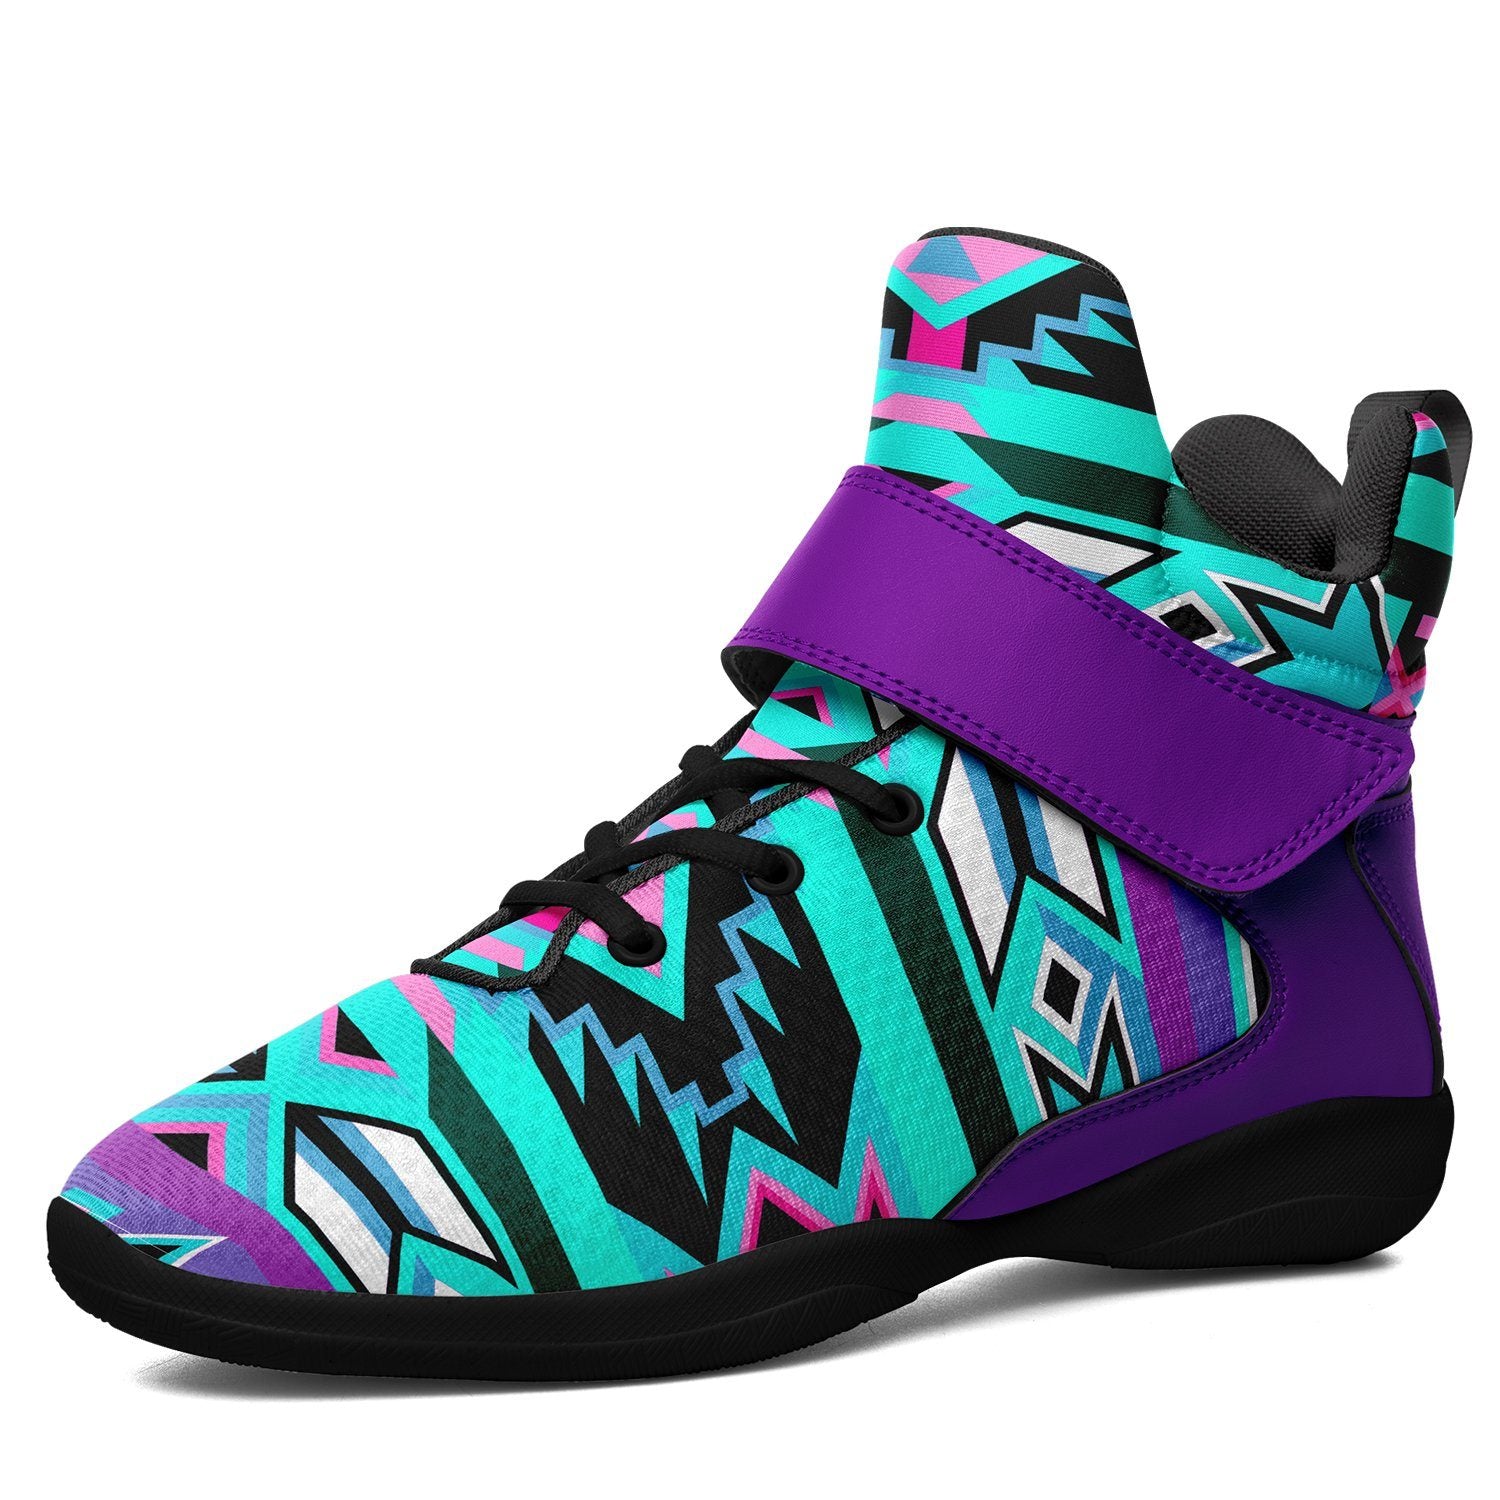 Northeast Journey Ipottaa Basketball / Sport High Top Shoes 49 Dzine US Women 4.5 / US Youth 3.5 / EUR 35 Black Sole with Indigo Strap 